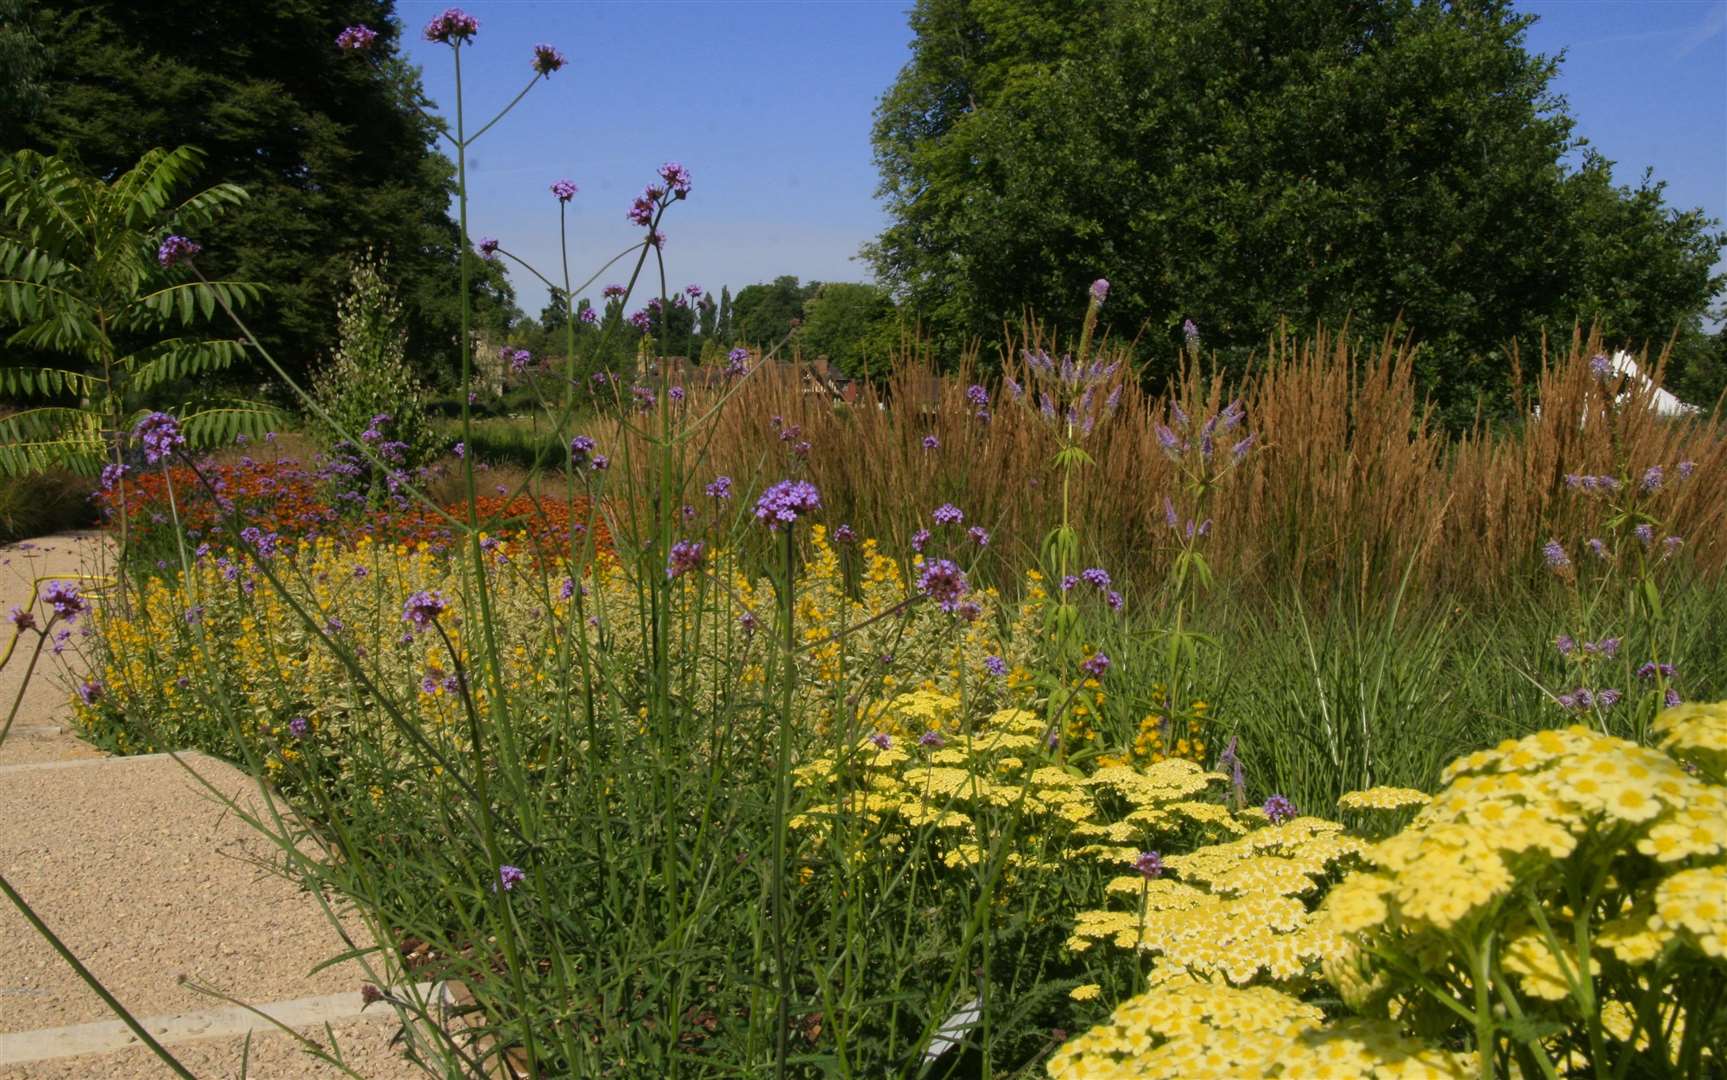 The ornamental grasses at the castle have delivered colour and vibrancy all summer